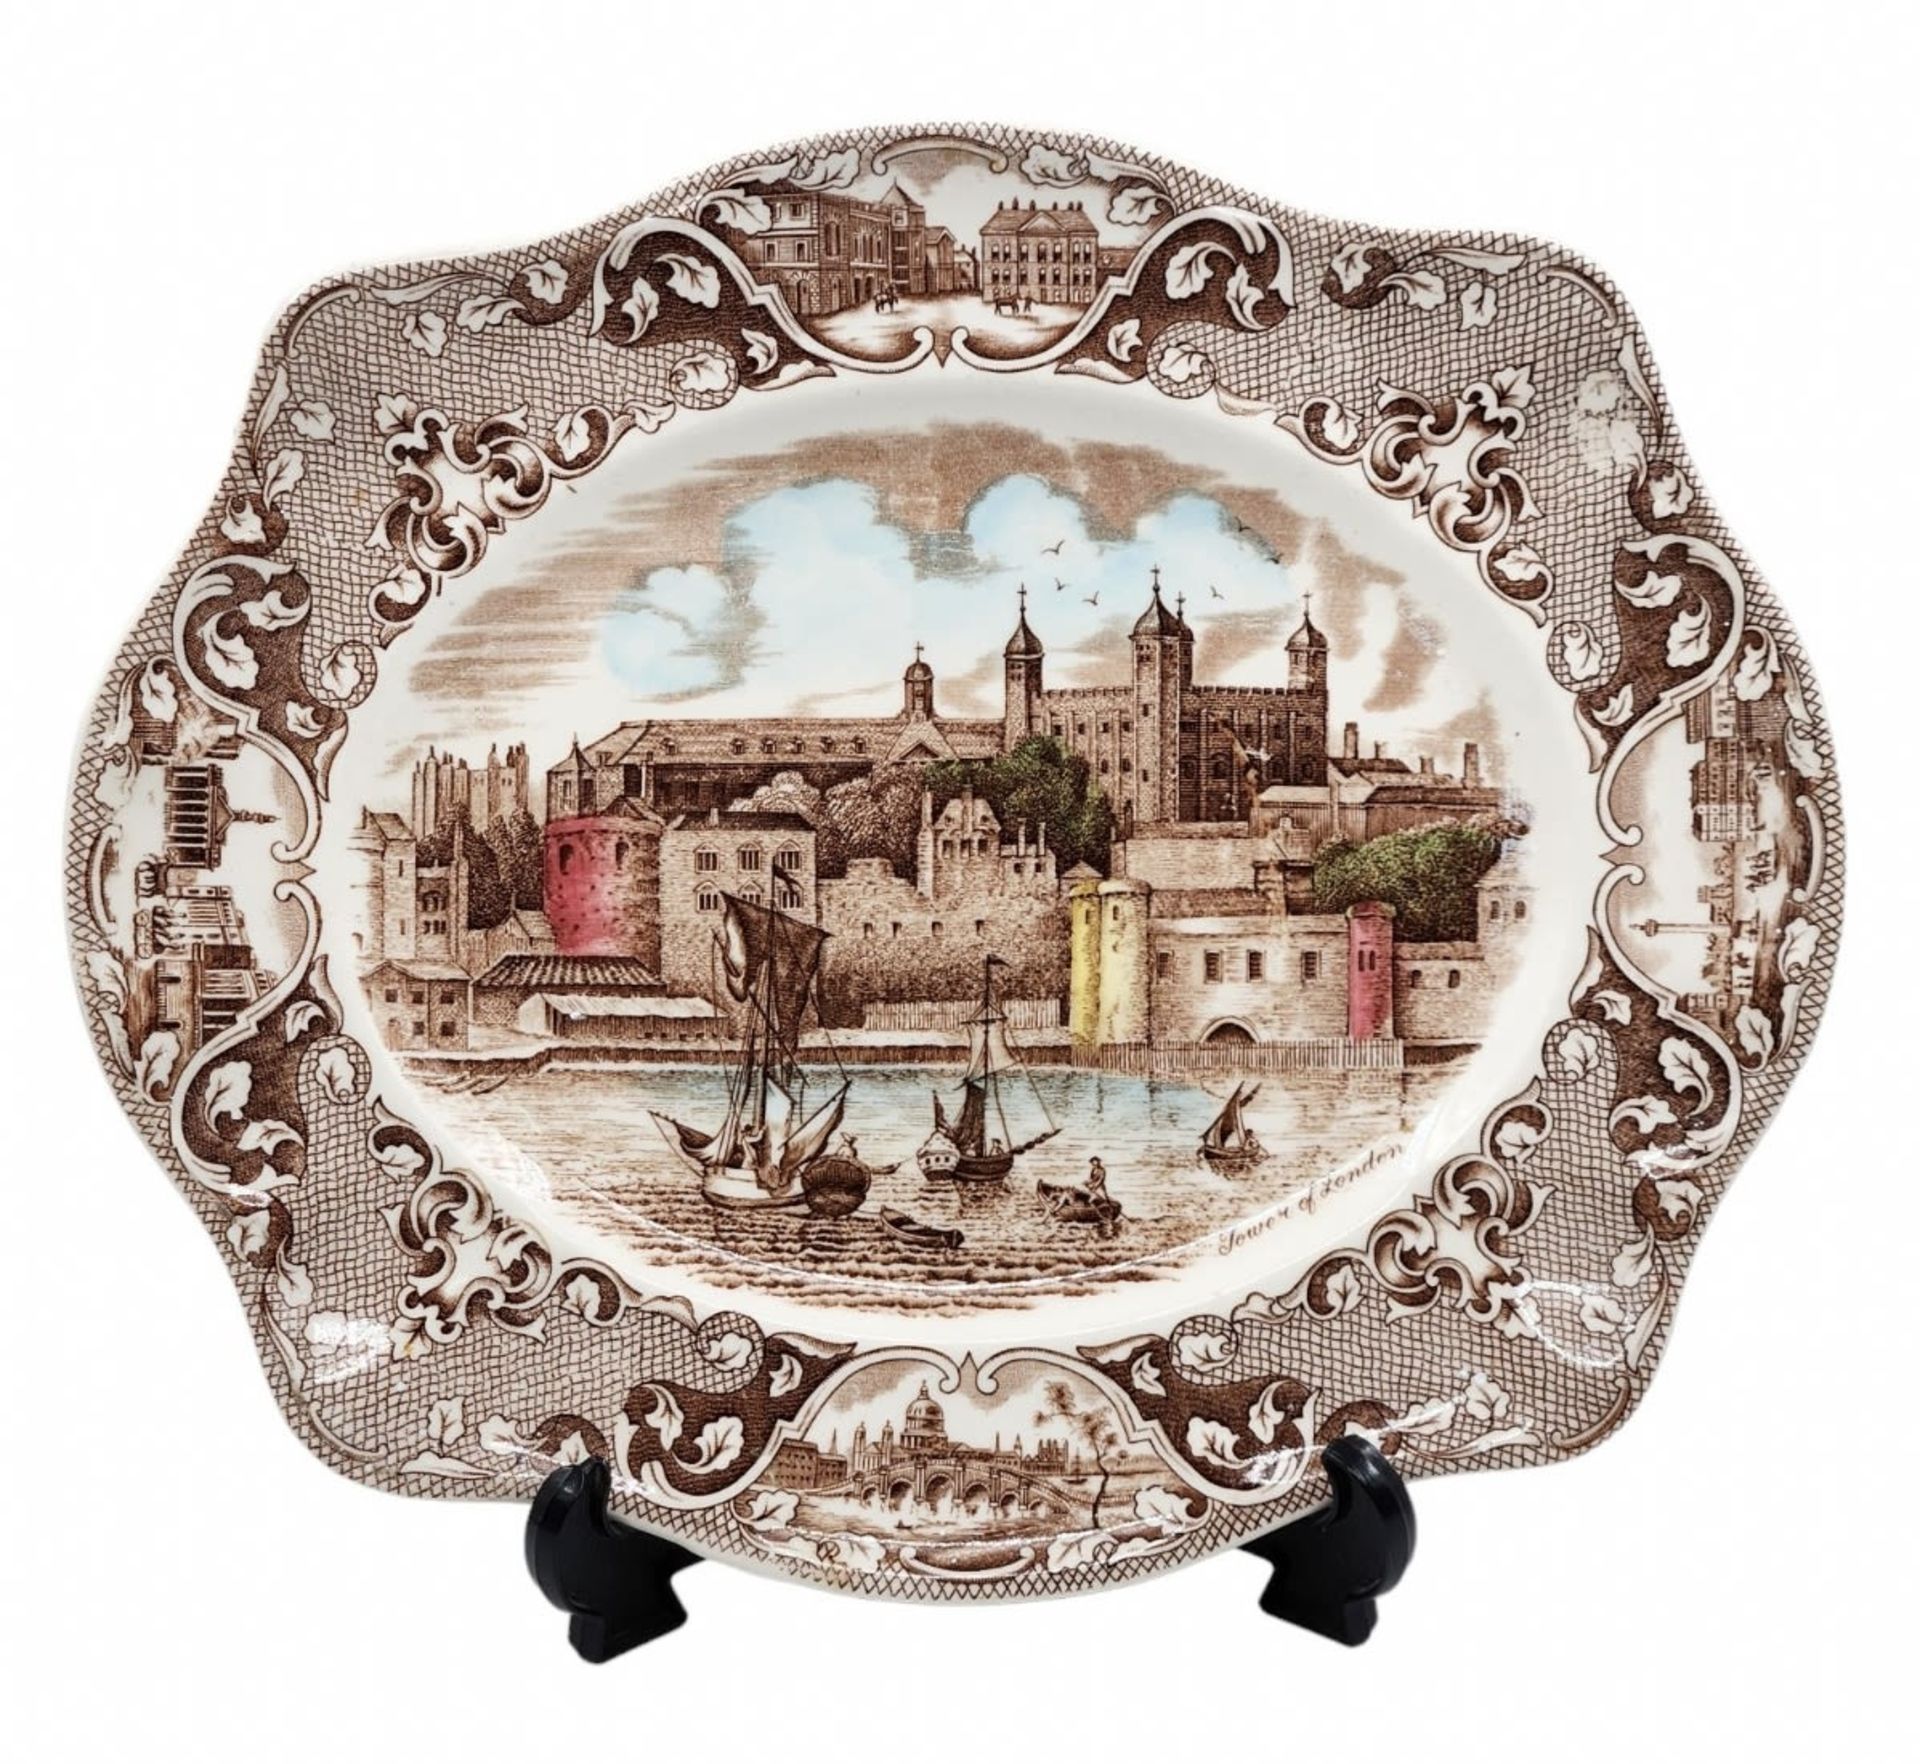 English serving plate, made of ceramic, decorated with 'Tower of London' print, made by 'Johnson